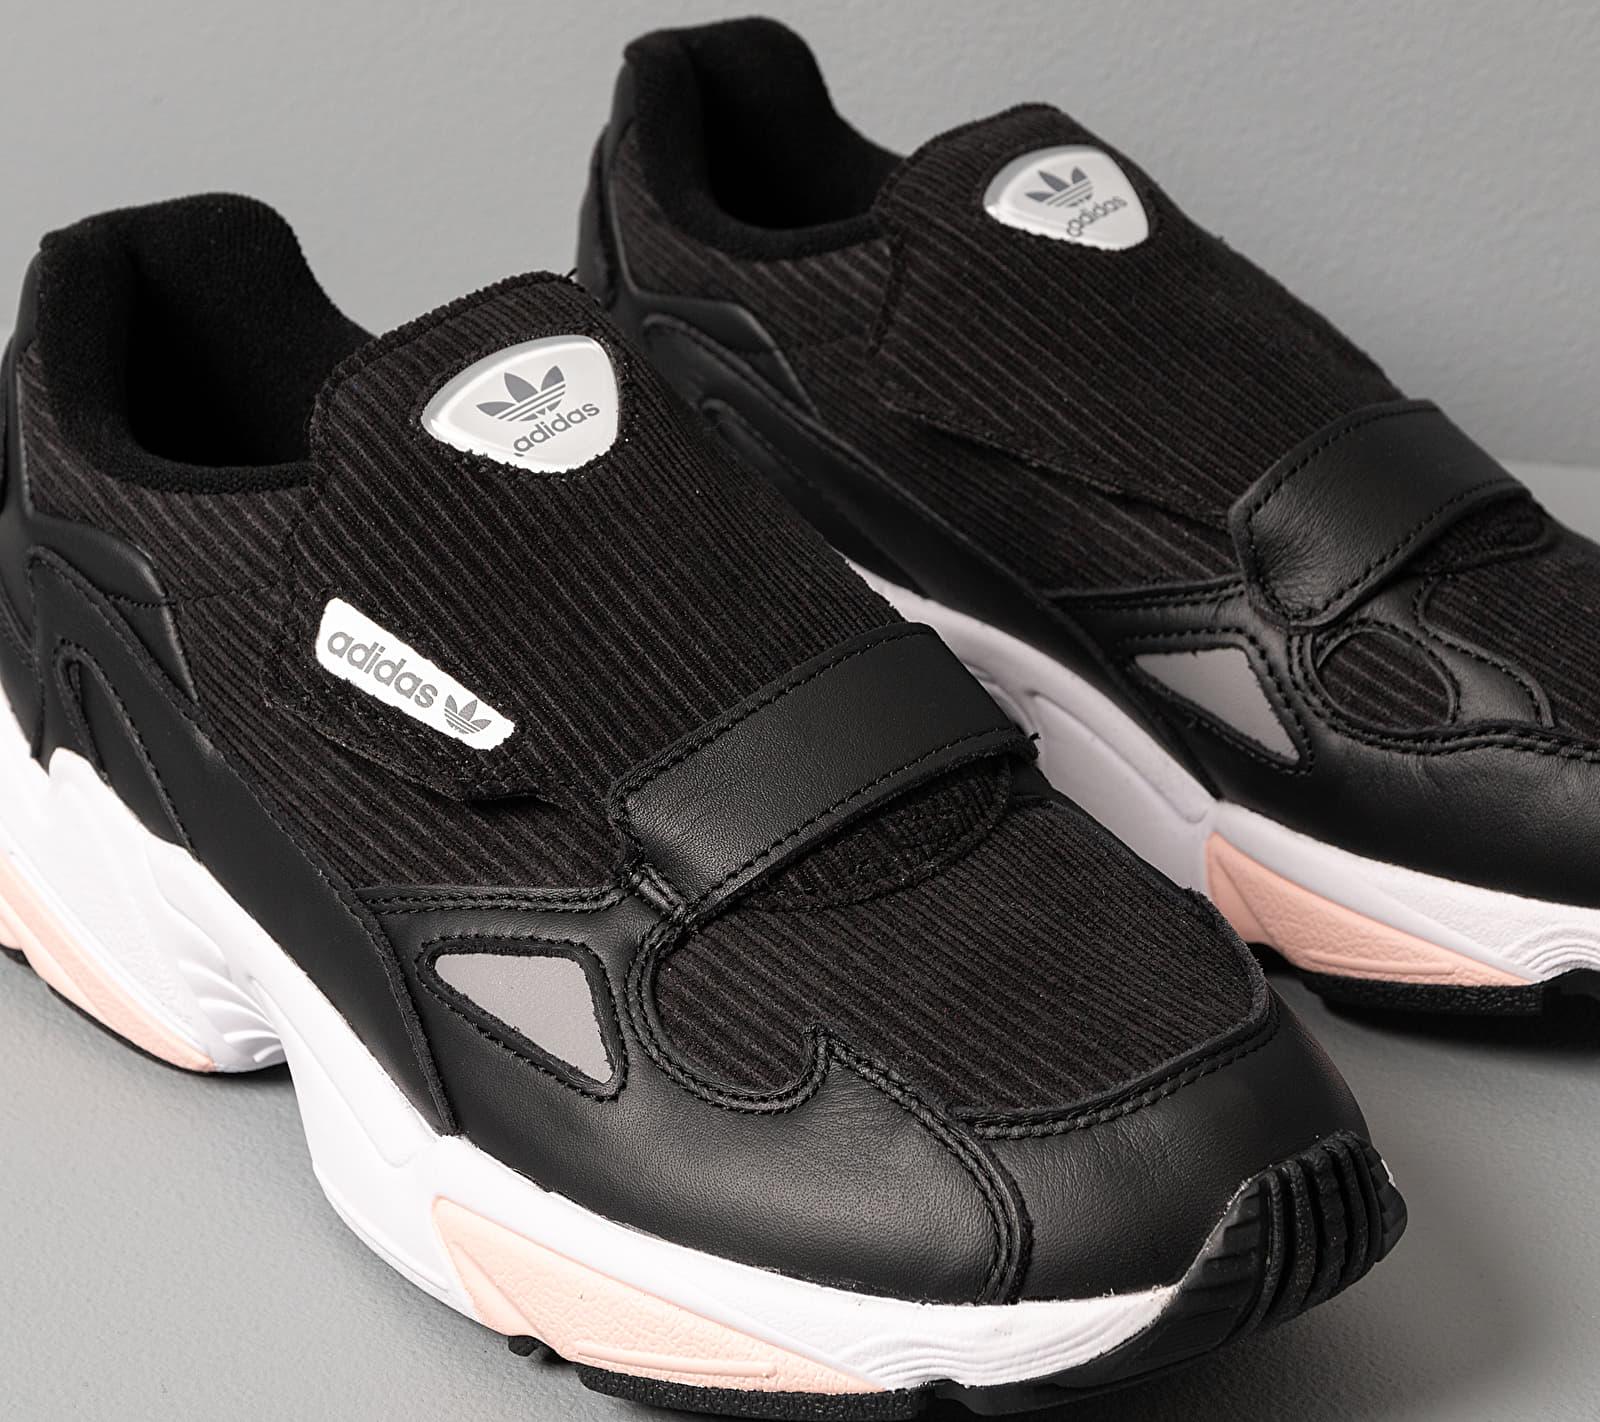 adidas originals falcon rx cord trainers in black and pink